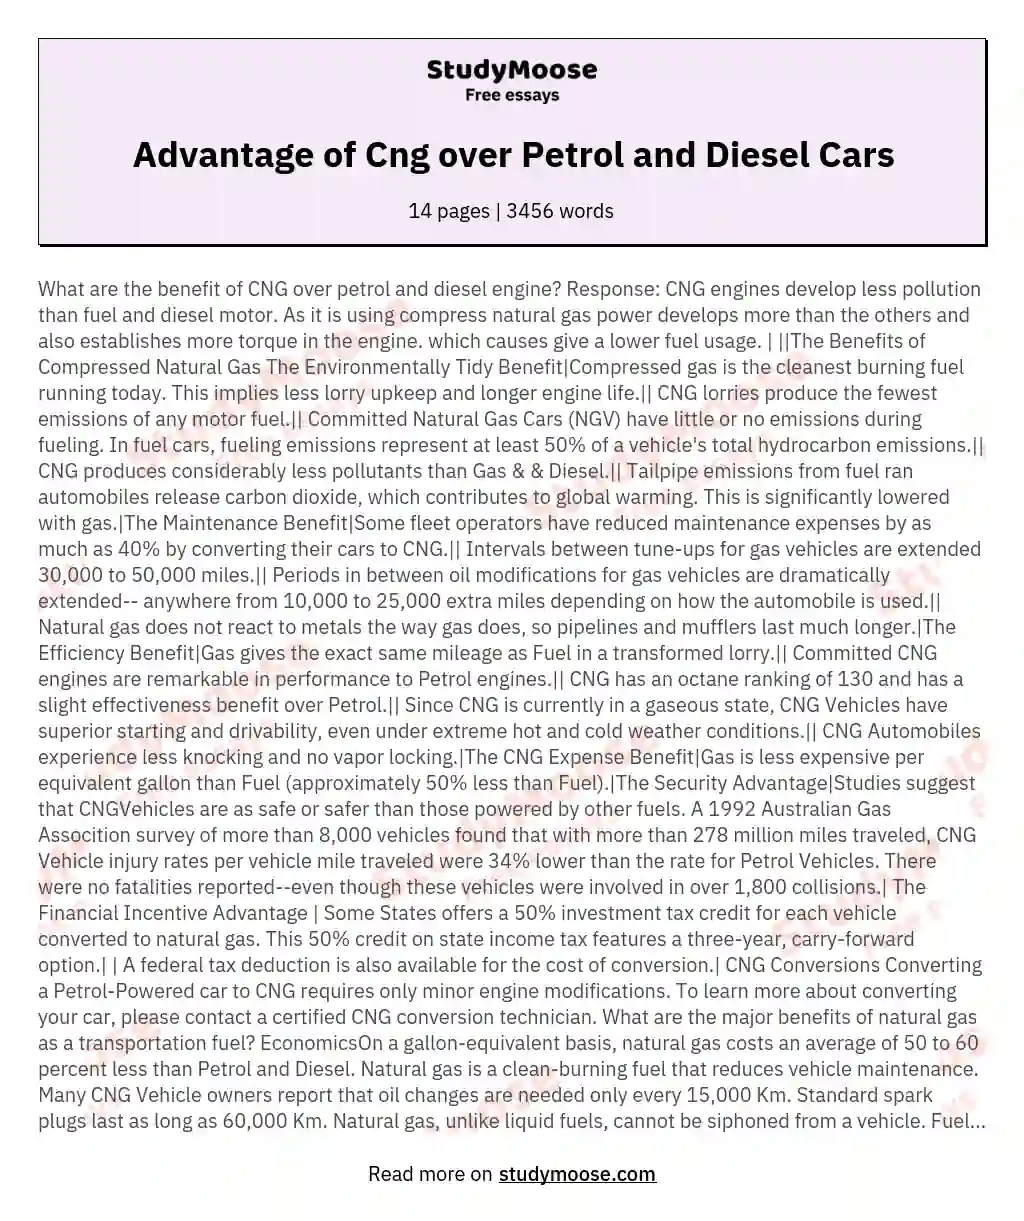 Advantage of Cng over Petrol and Diesel Cars essay